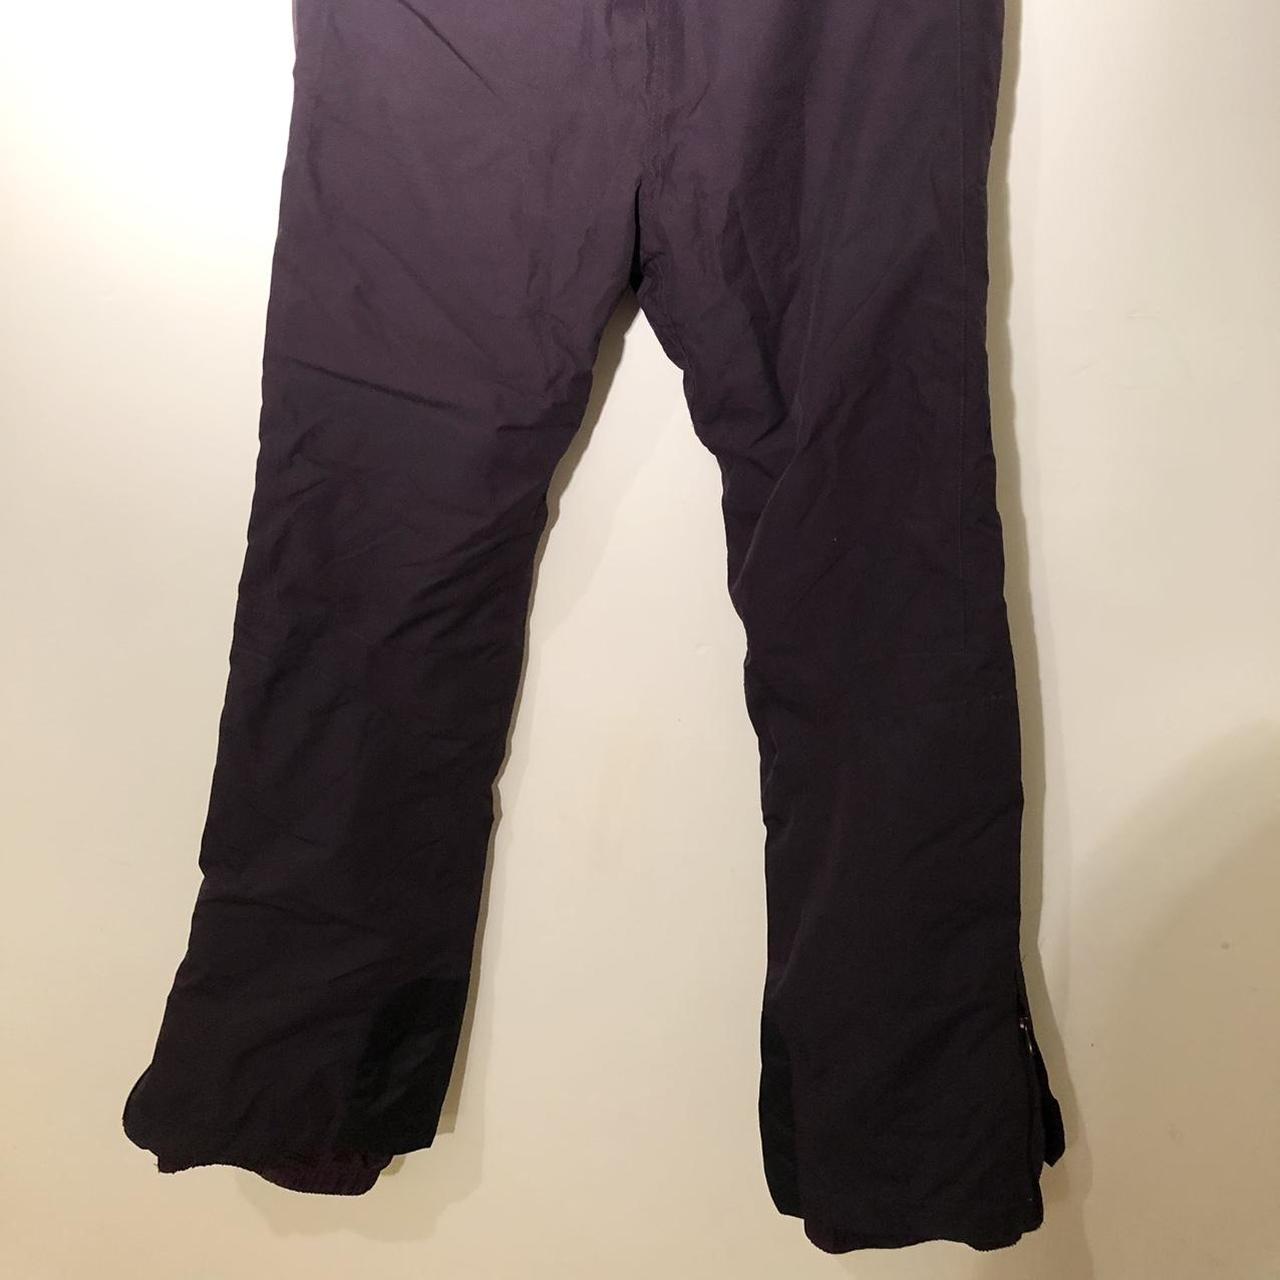 Protest Ski Trousers, worn once, too small. Tight... - Depop